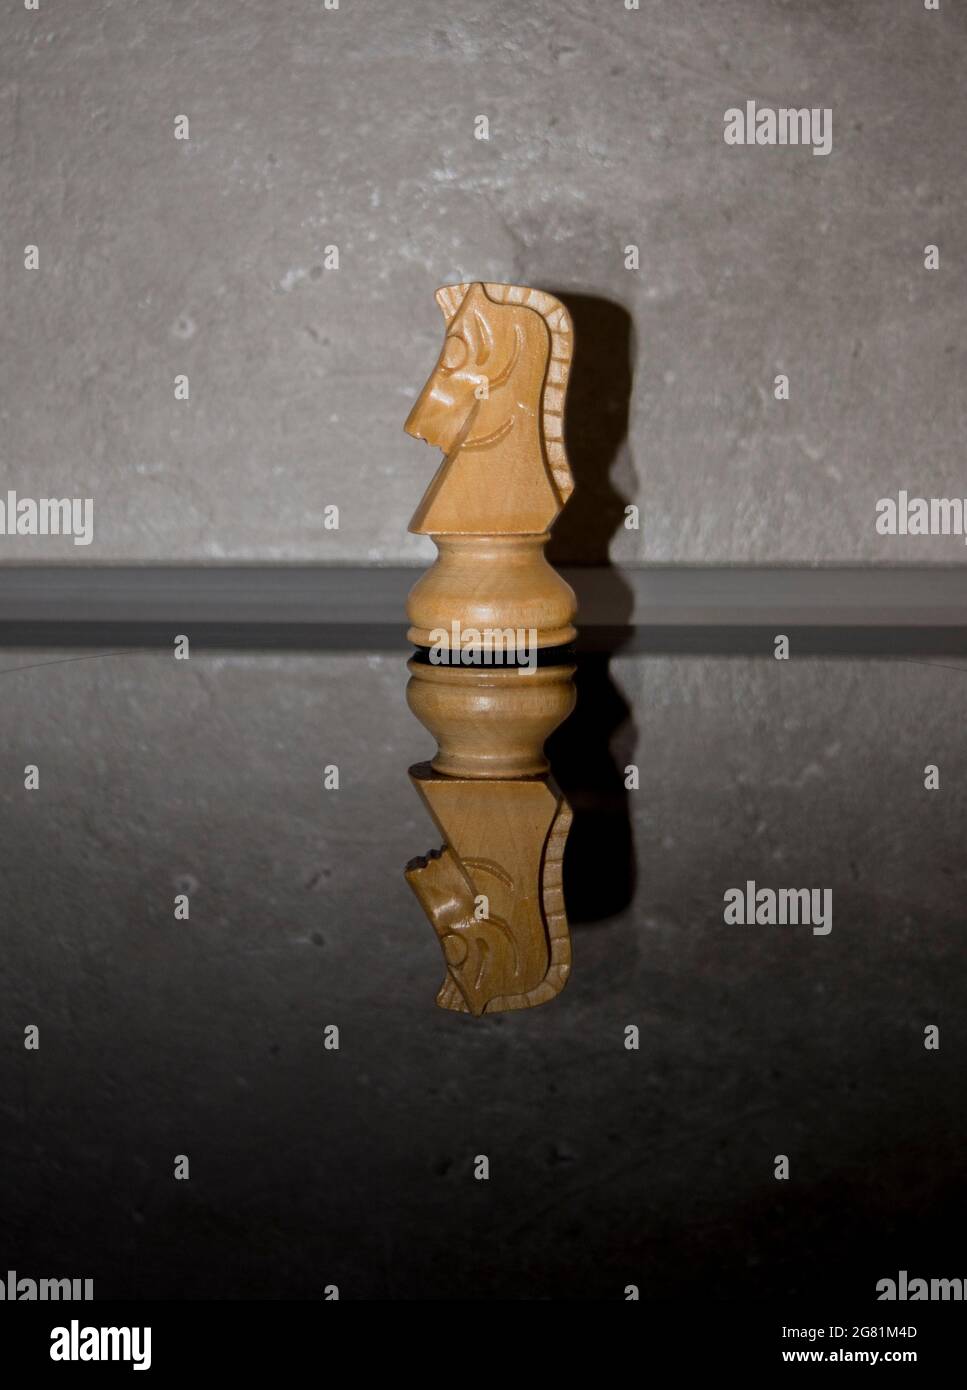 Wooden white chess piece, knight on dark mirror glass with concrete wall background. Games, sports and recreation idea. Stock Photo